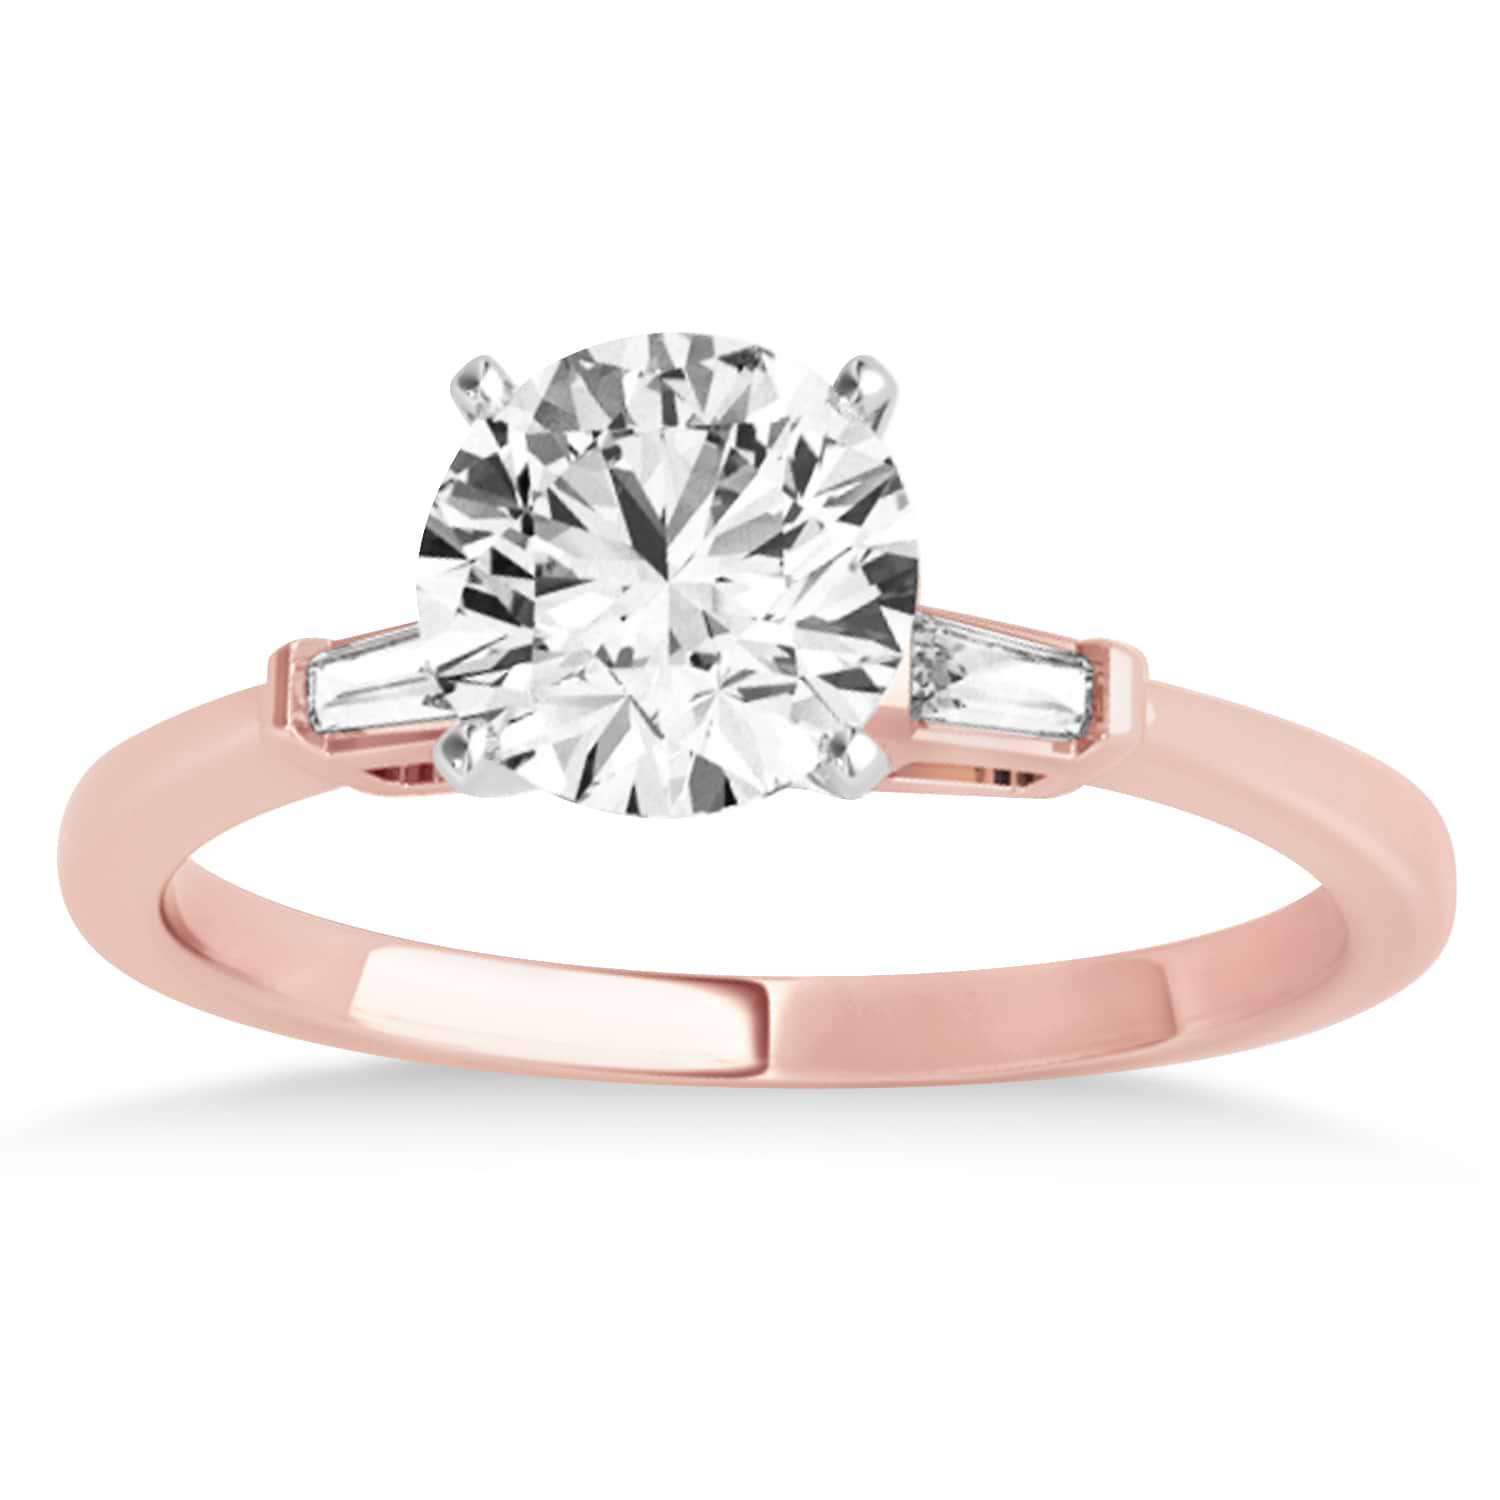 Tapered Baguette 3-Stone Diamond Engagement Ring 18k Rose Gold (0.10ct)